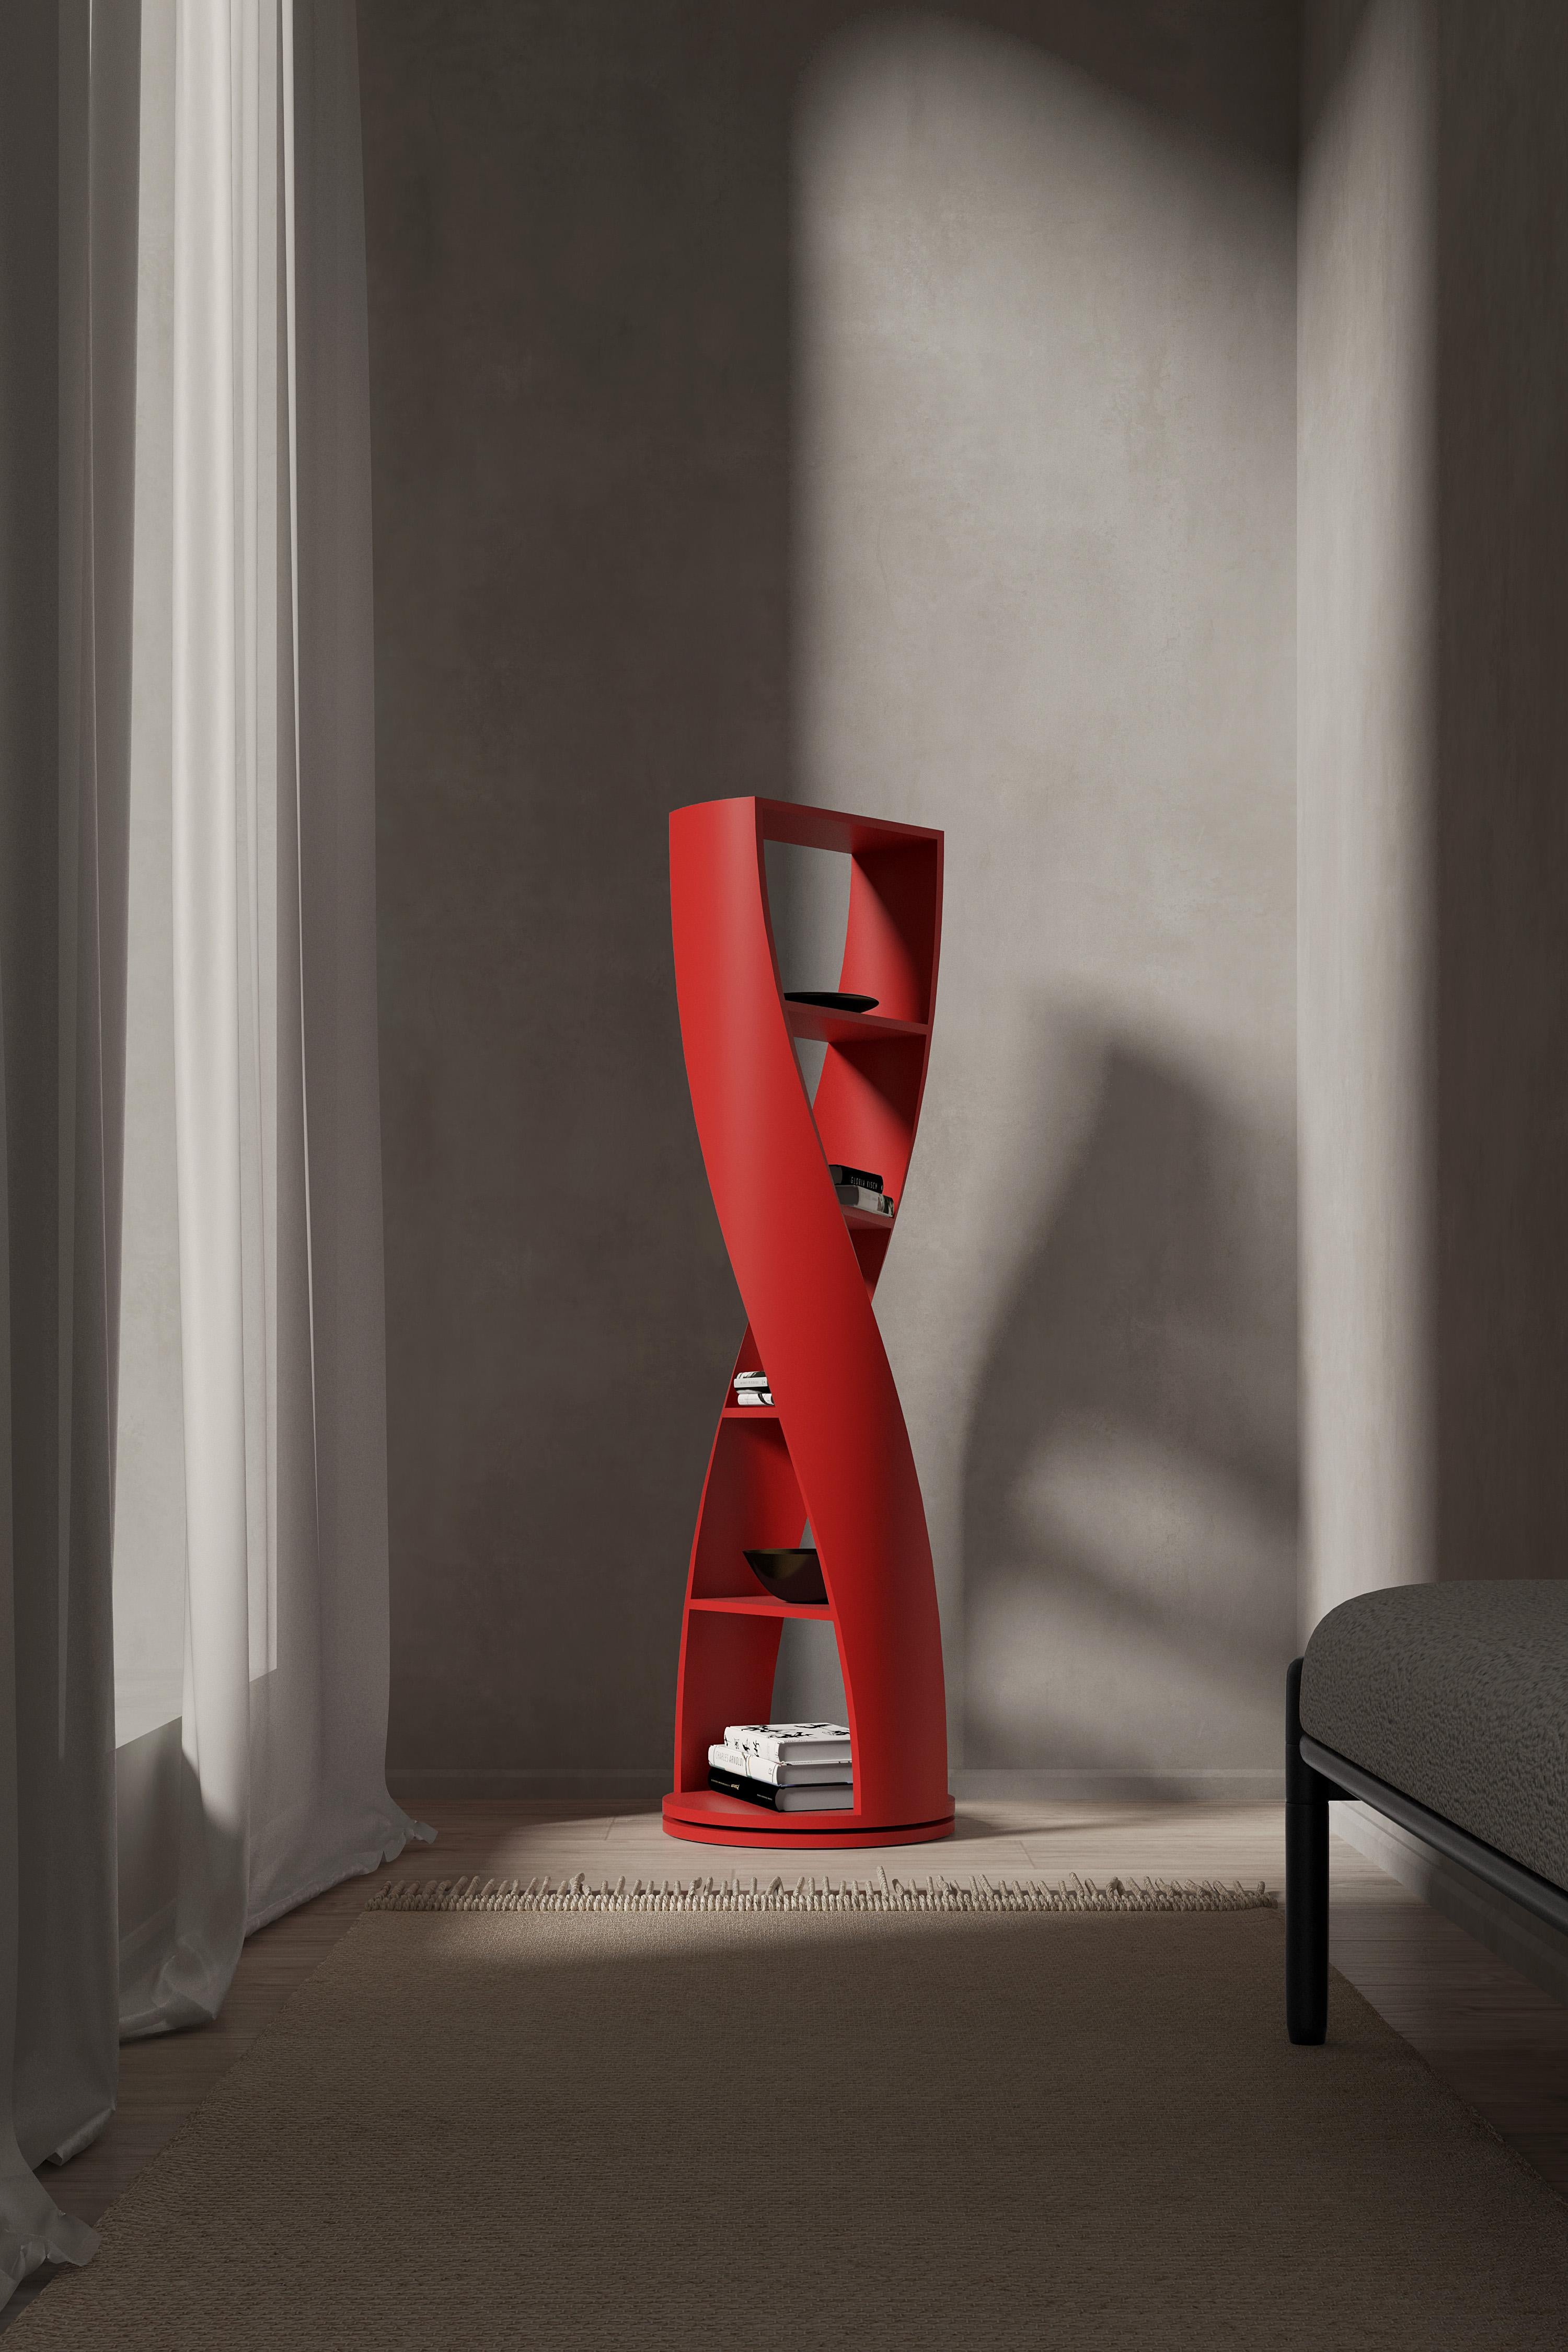 MYDNA is a chic and contemporary storage system inspired by the DNA concept: both by its sophisticated double helix shape, and by the metaphorical statement that everything you place on it defines a significant part of your personal identity. MYDNA